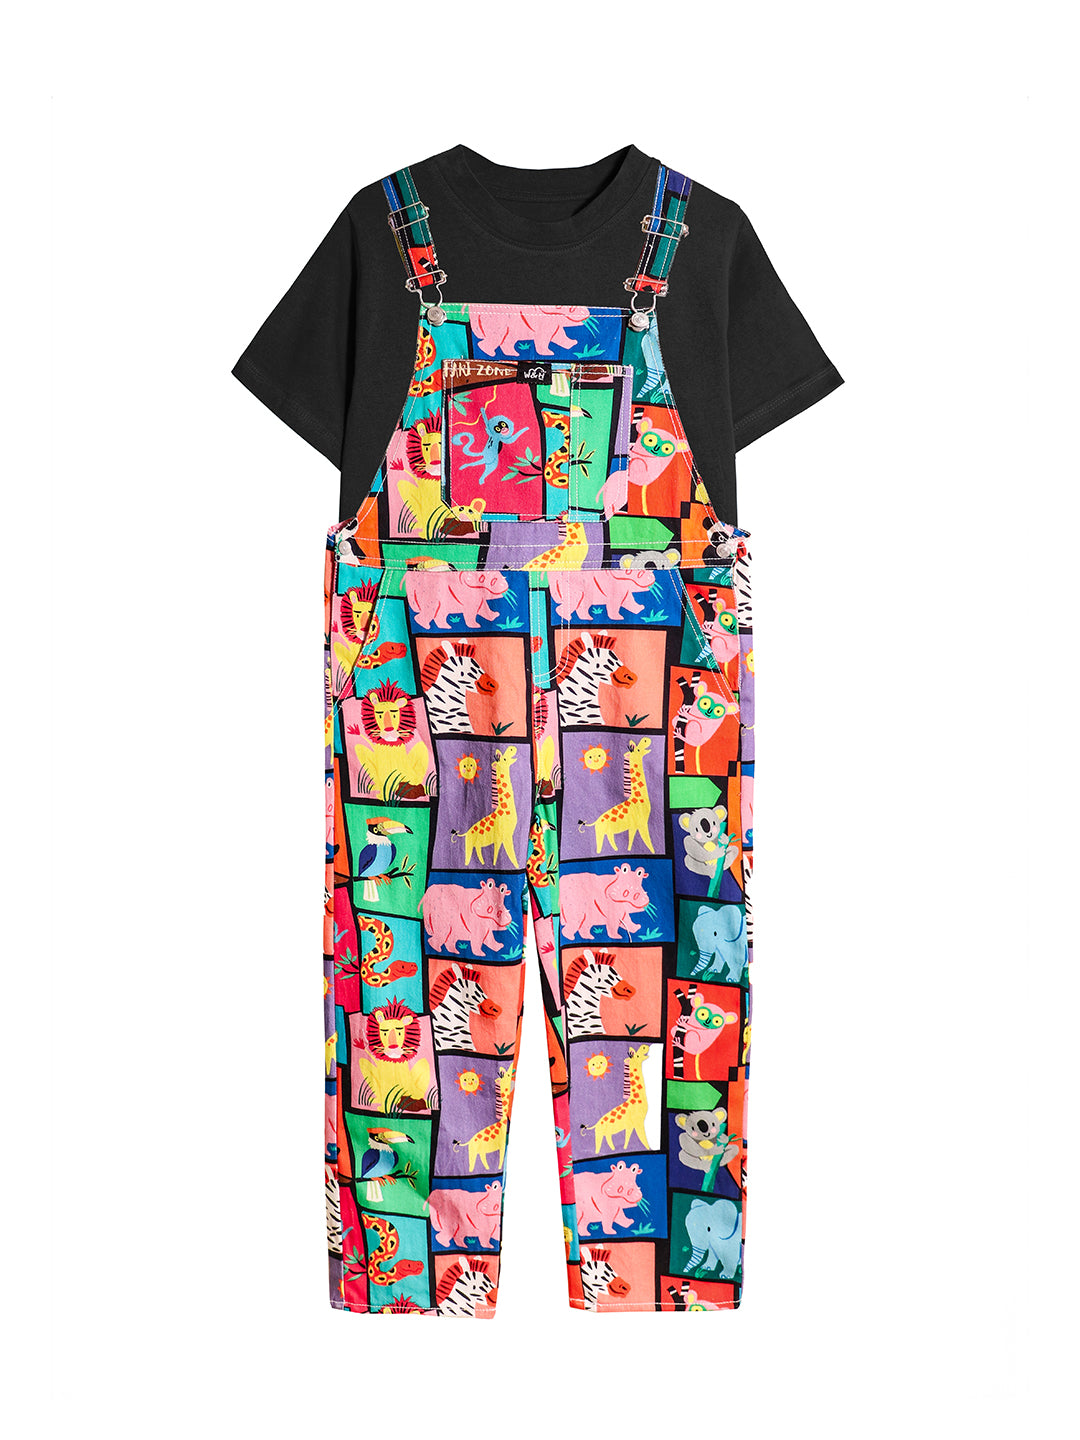 Safari Zone Dungaree Cotton with Black T-shirt for Boys & Girls